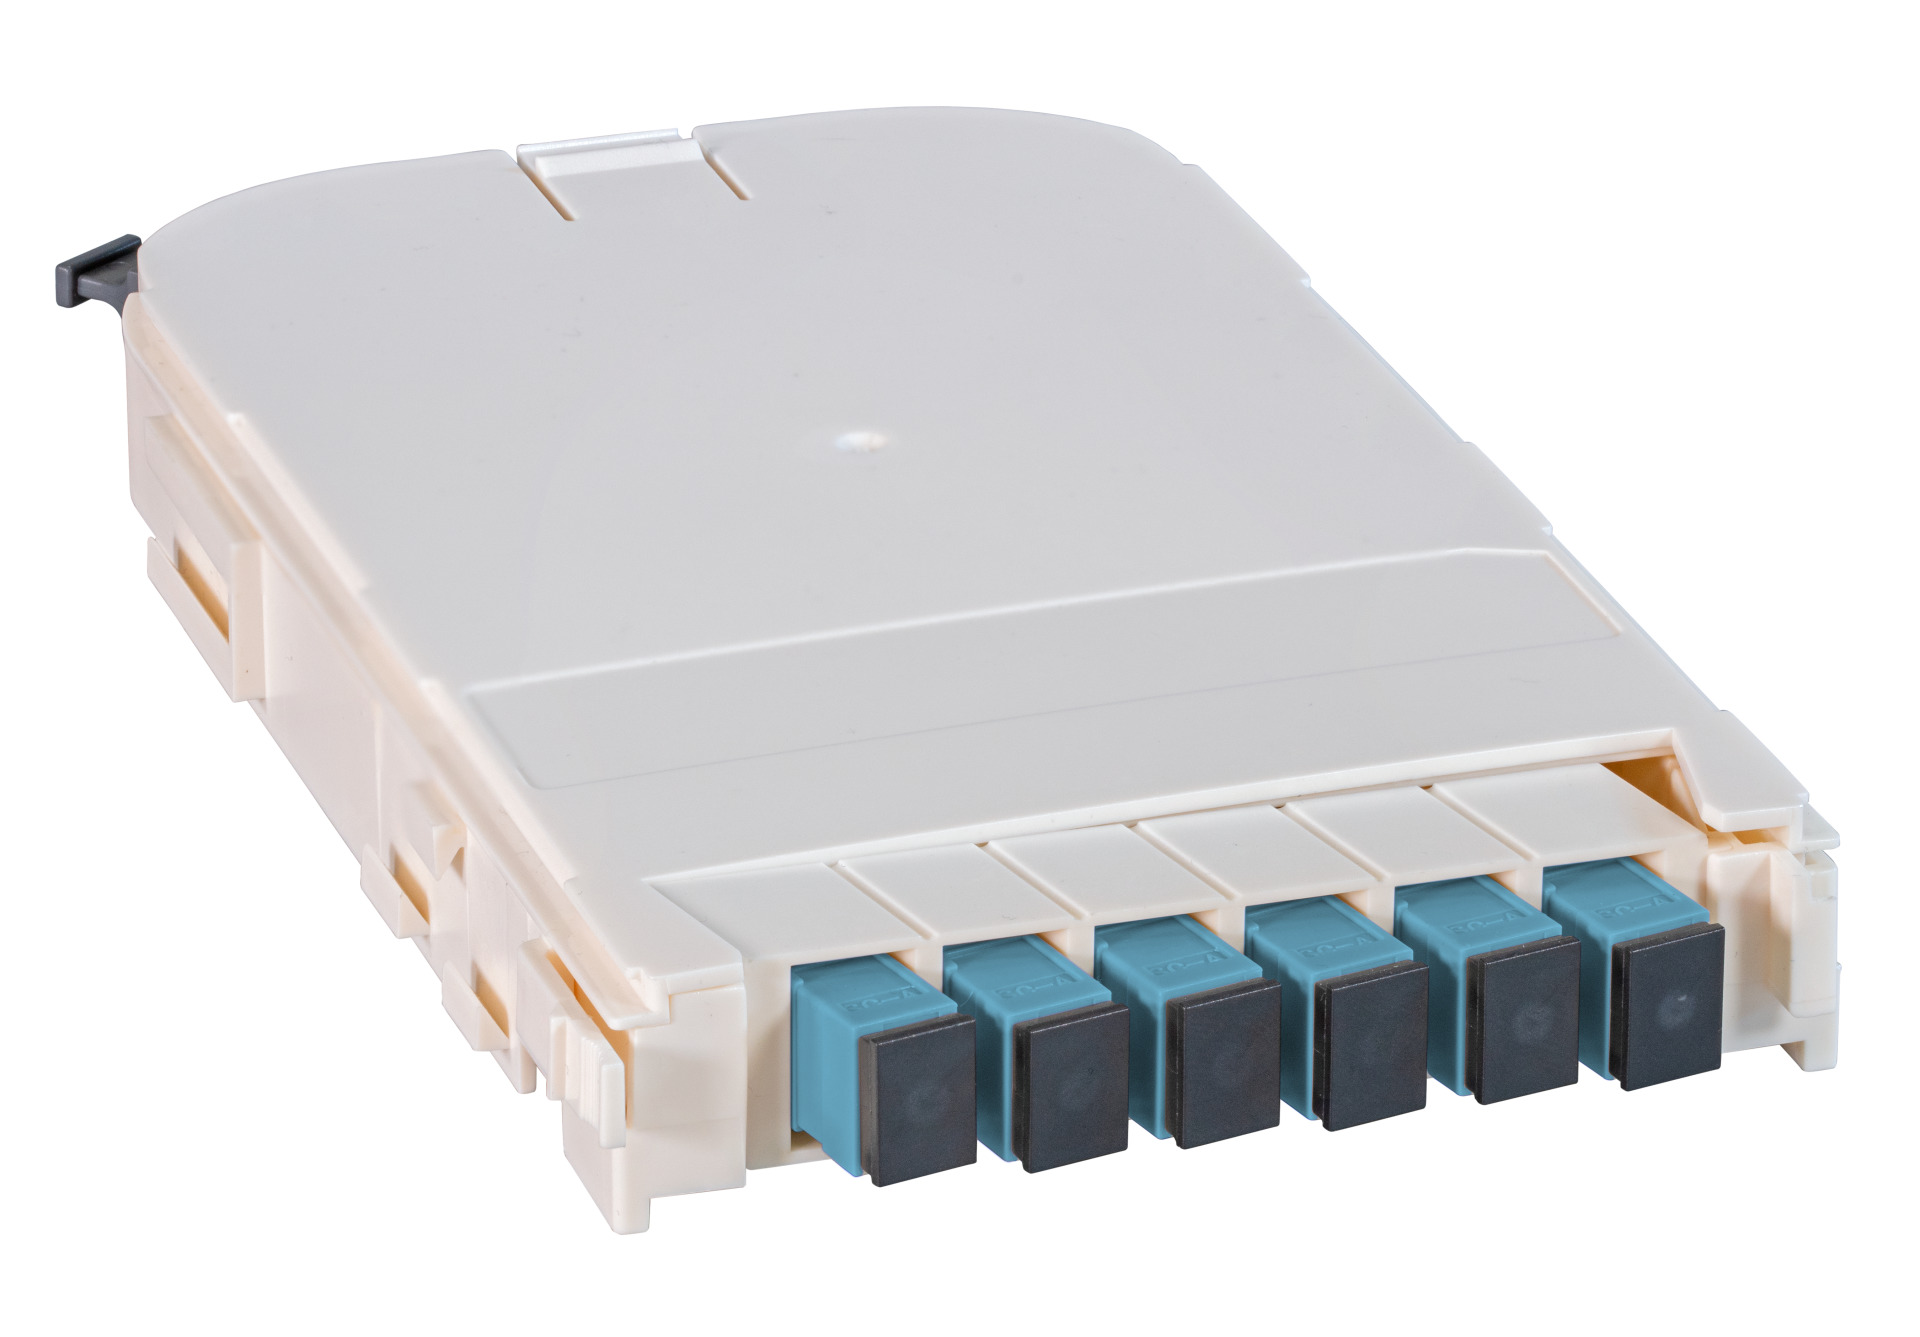 FTTH Module for FTTH-BGT, 6 Port SC with OM4 ceramic adapter